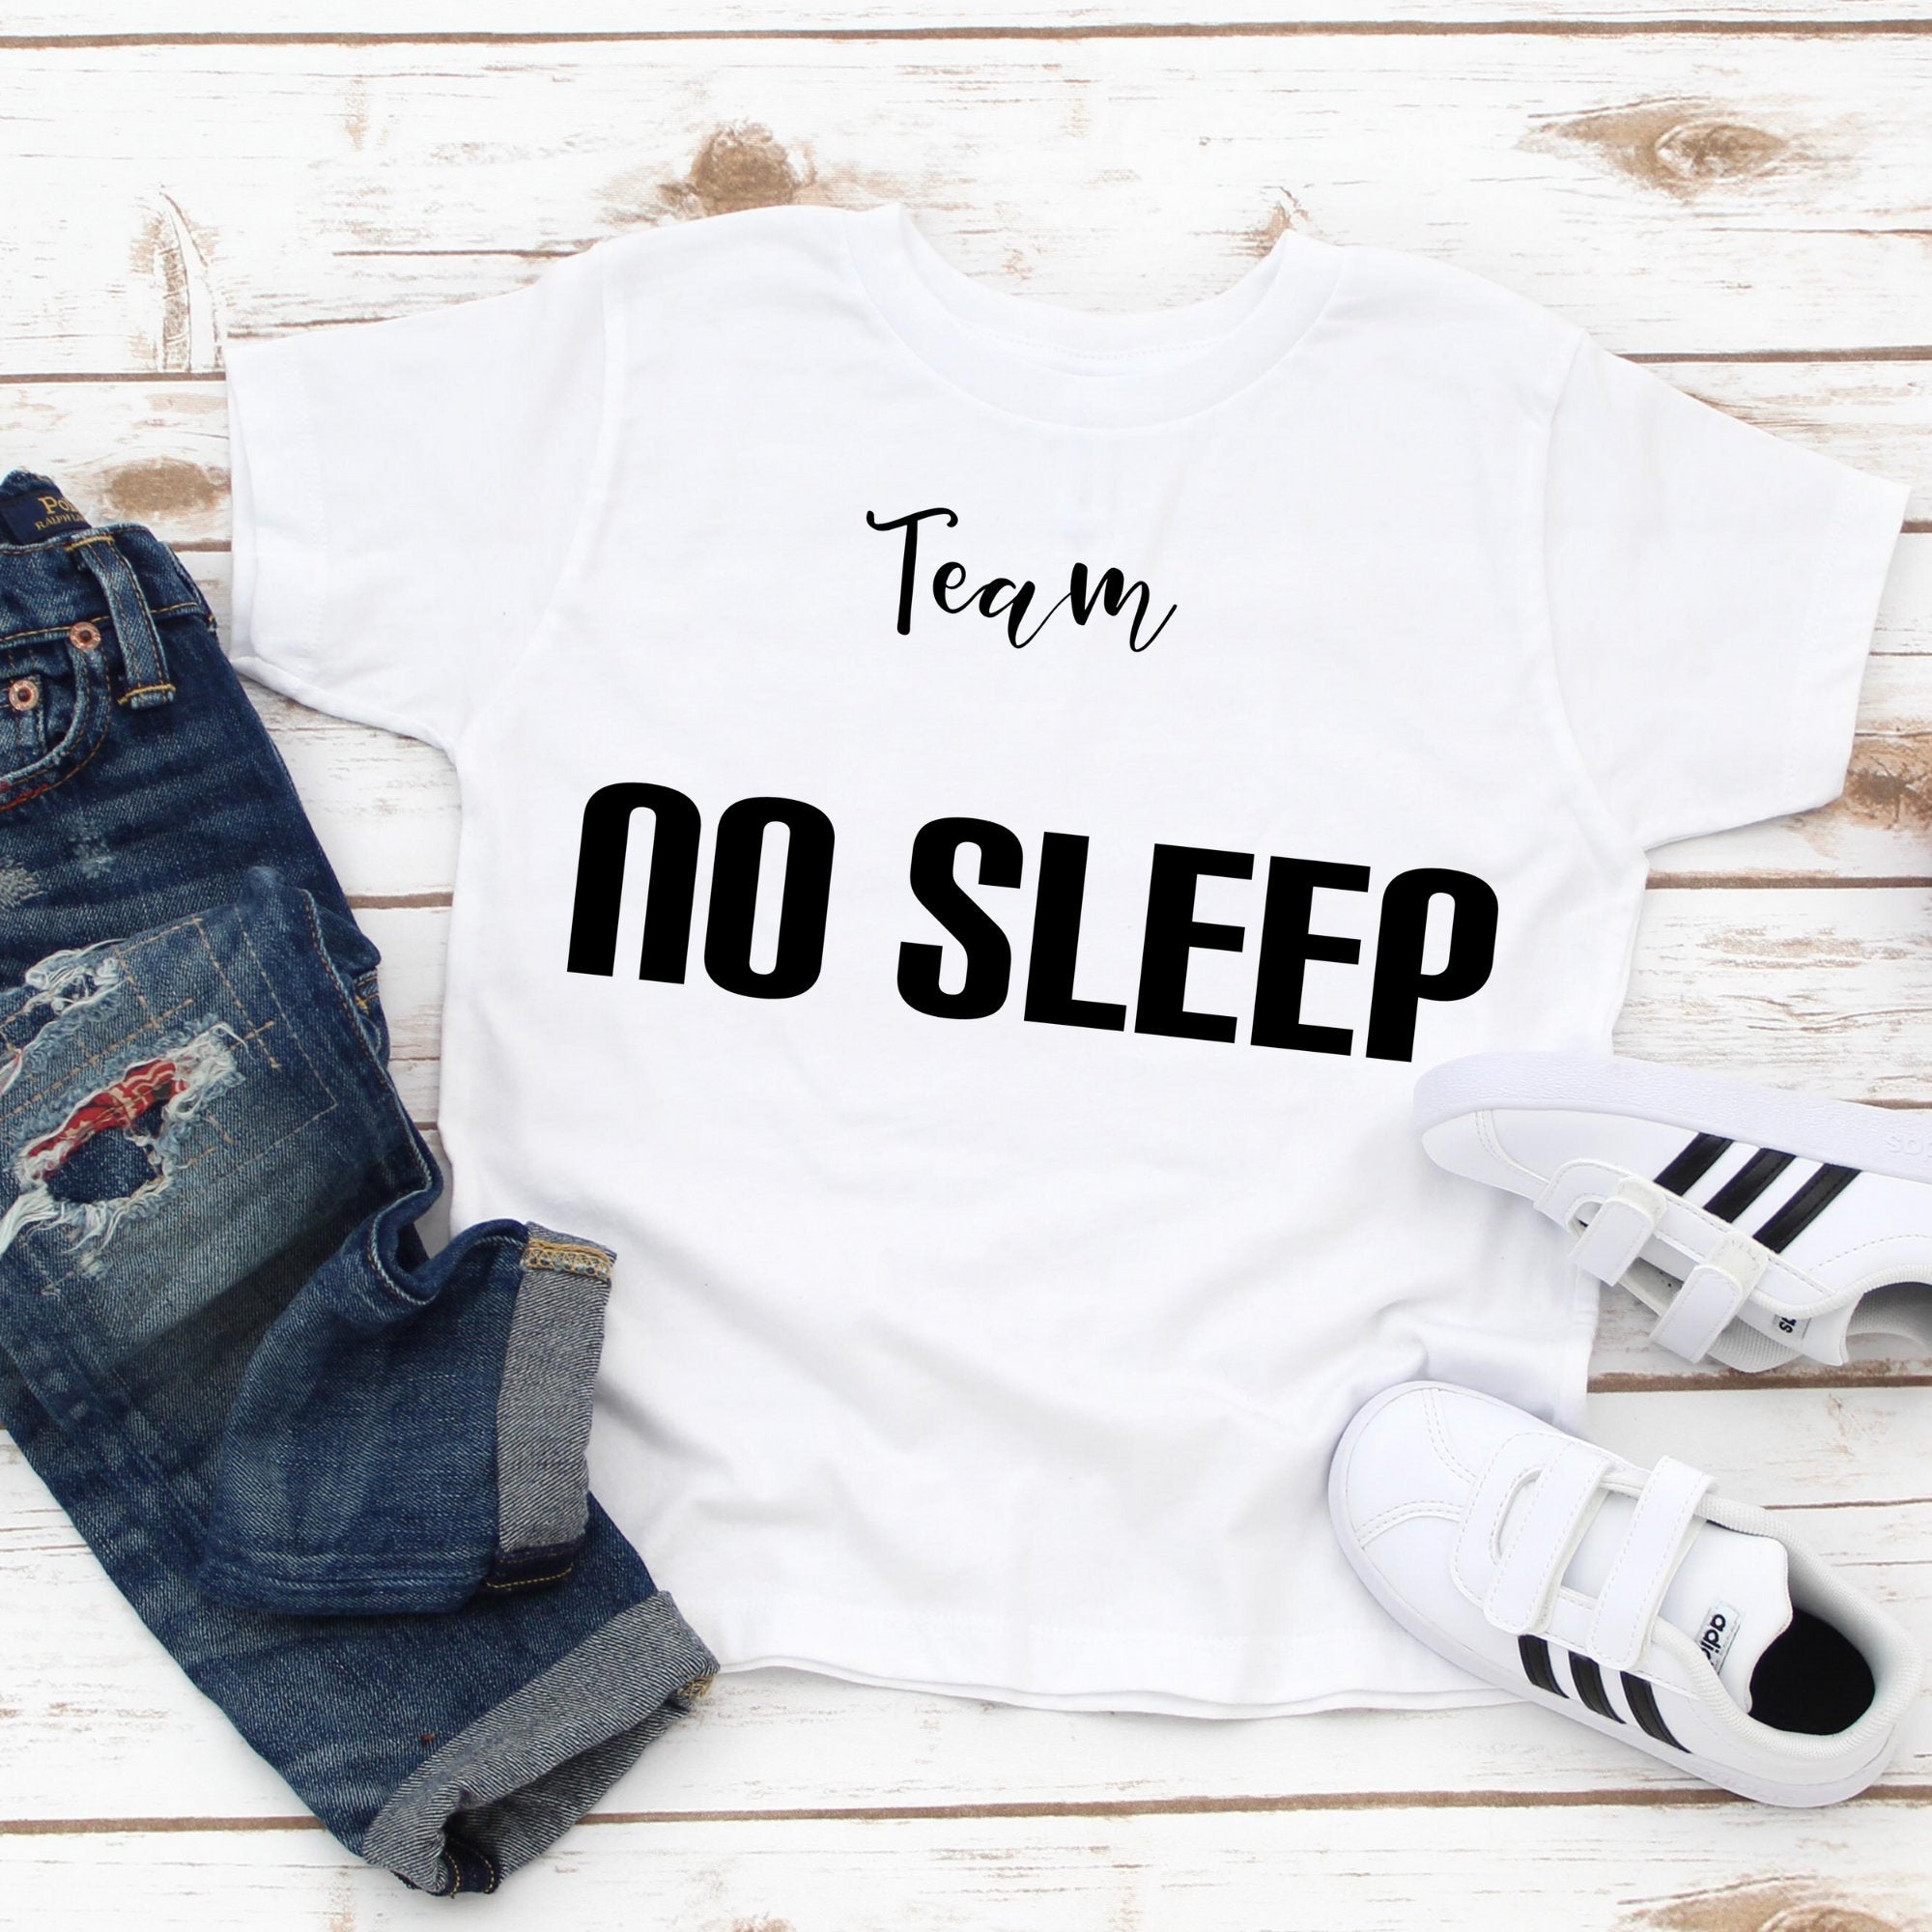 Father Son Matching Shirts,Matching Shirts for Dad and Son, Father Daughter Matching, Team No Sleep Dad and Baby Tee, Matching Family Shirt - MamaBuzz Creations